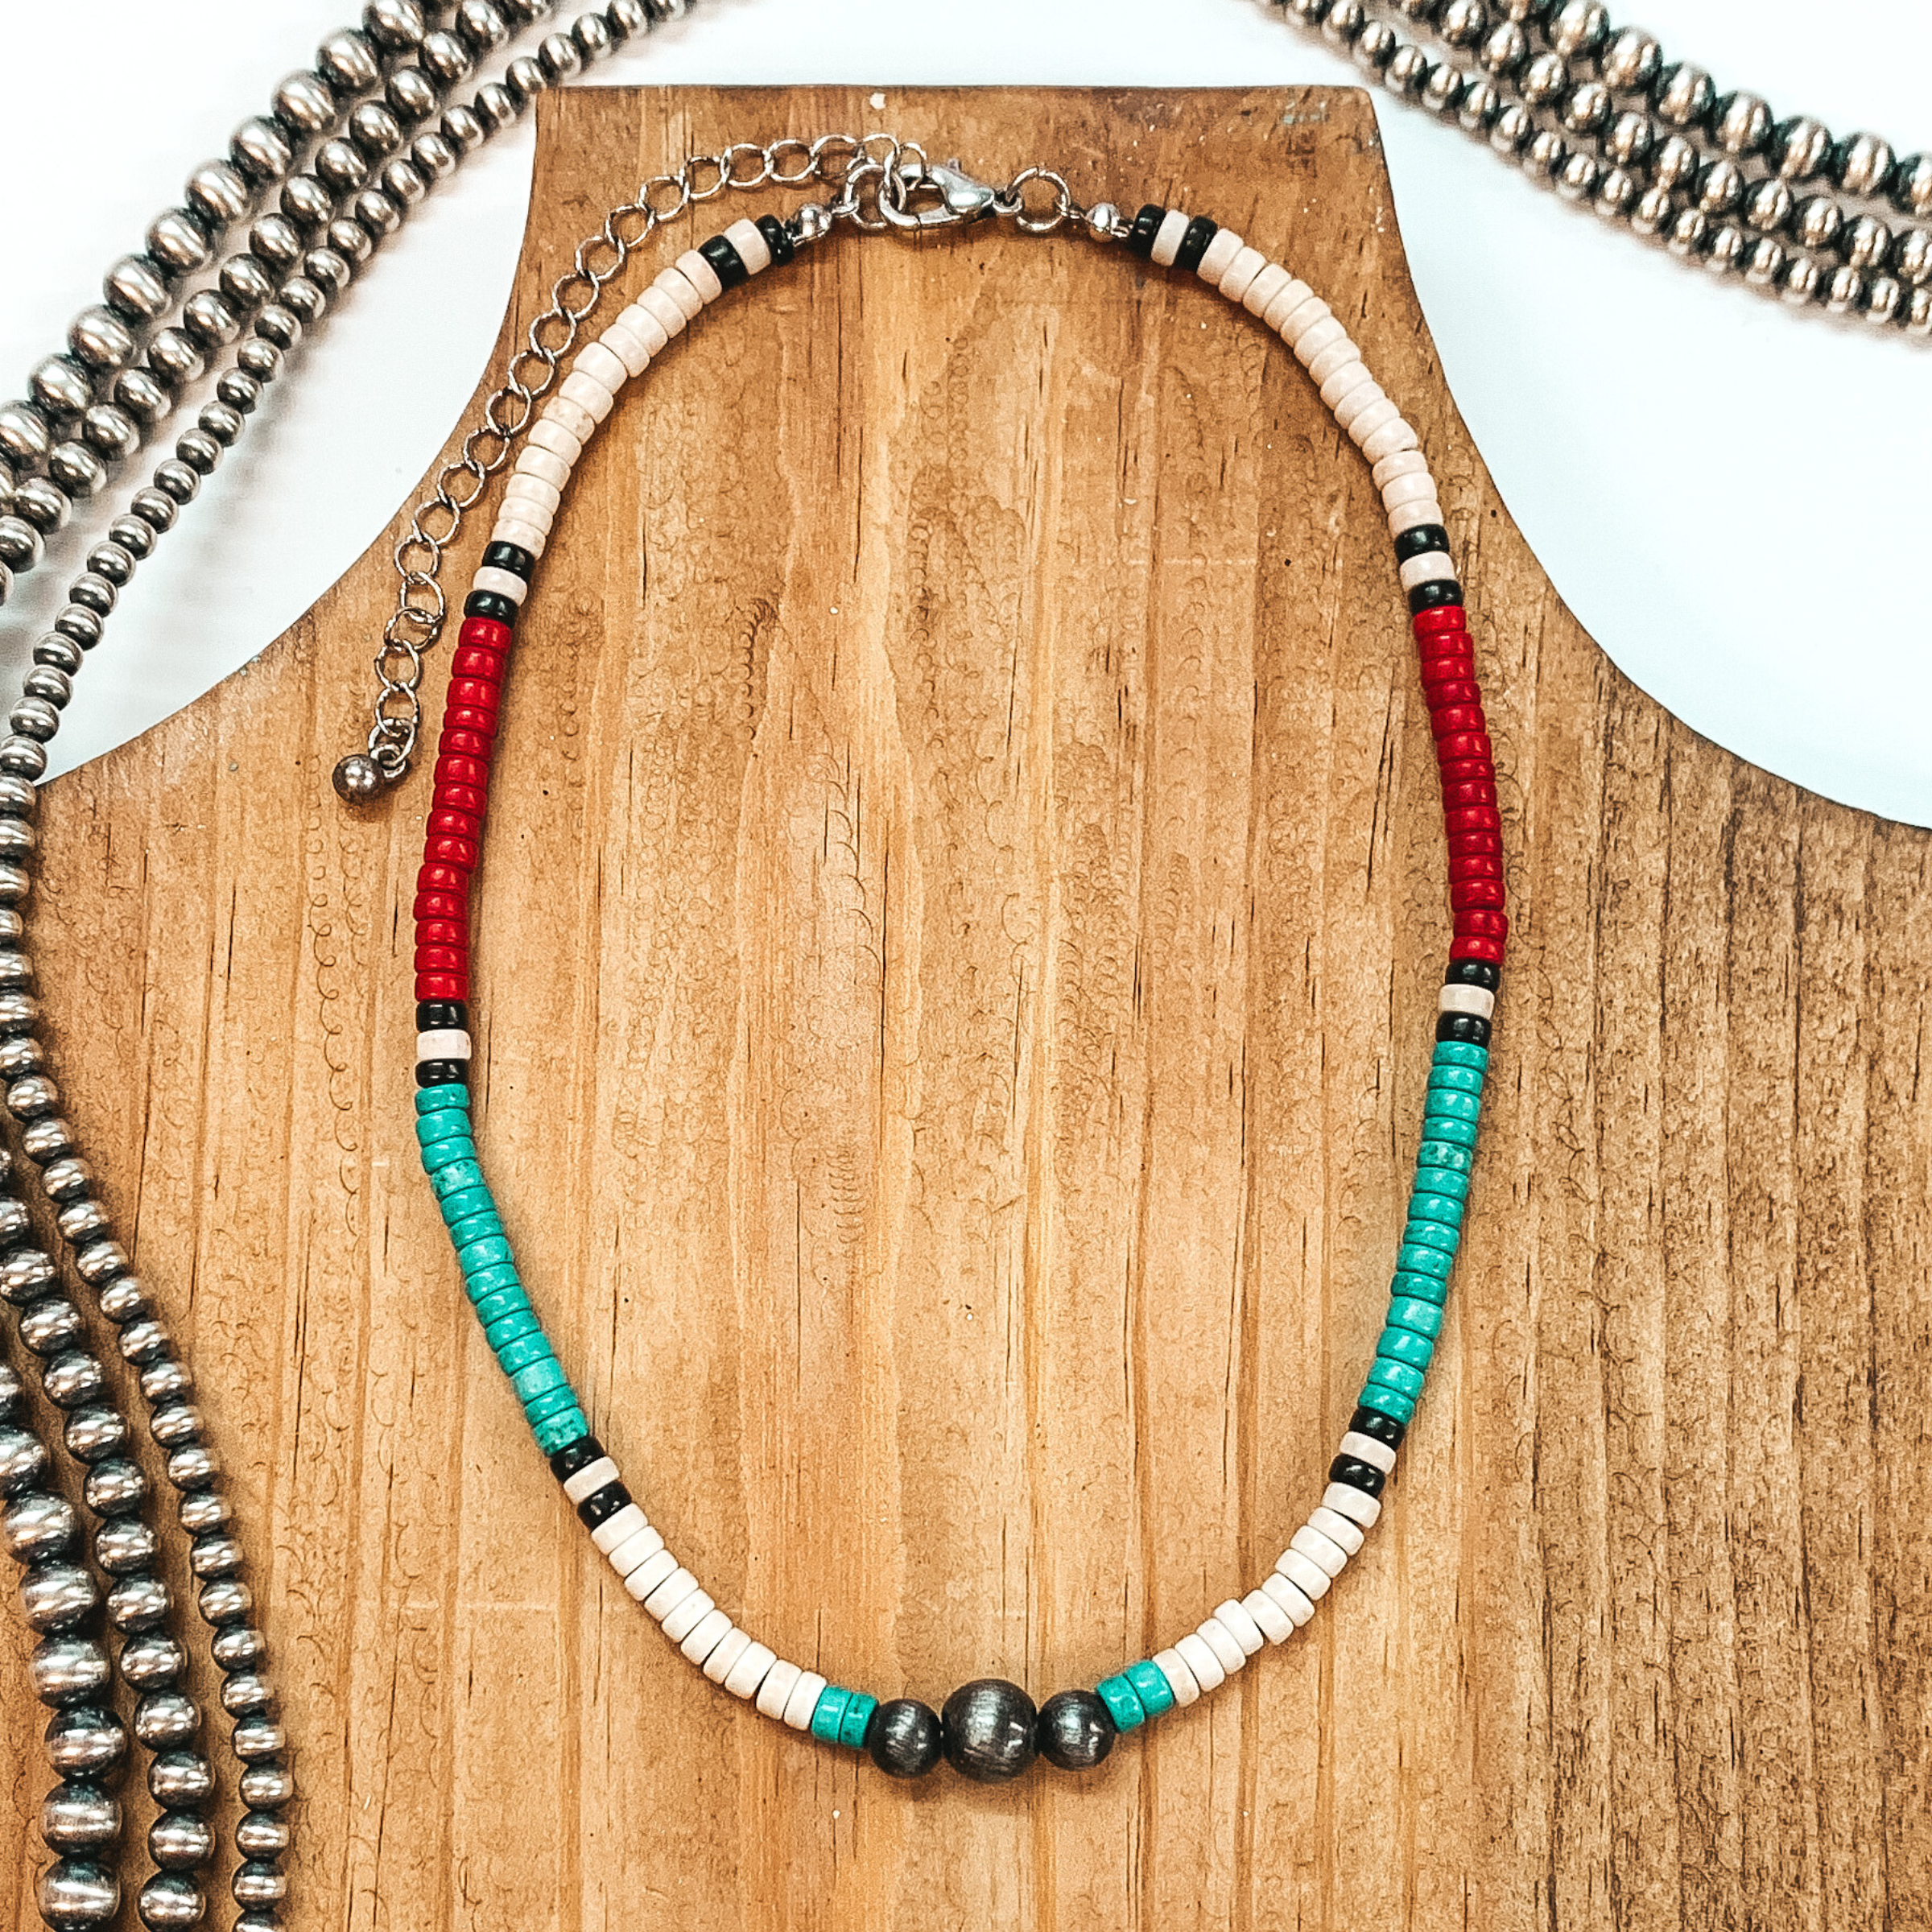 This necklace has segments of beads in the colors ivory, red, and turquoise with black beaded spacers. This necklace also includes three silver beads at the center. this necklace is pictured on a brown necklace holder on a white background with silver beads. 